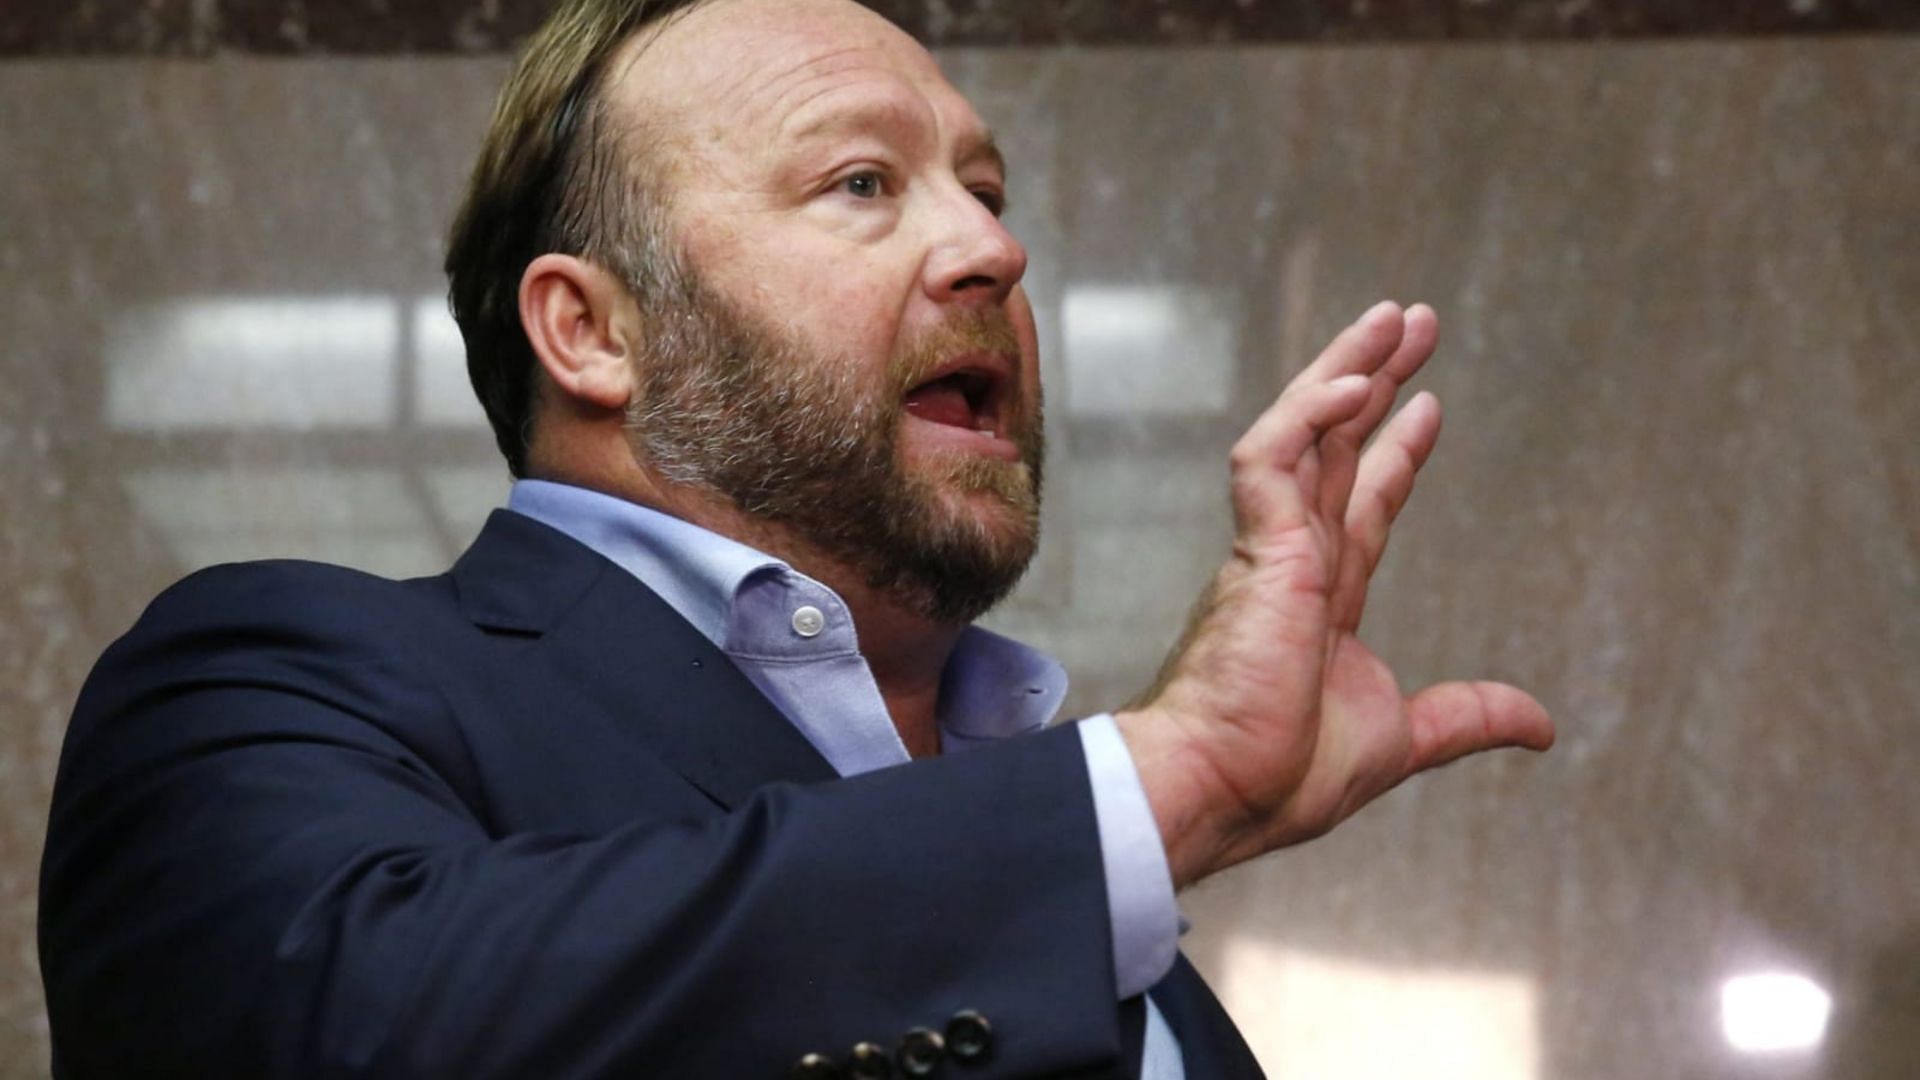 Right-wing conspiracy theorist Alex Jones was sued by parents of Sandy Hook shooting victim for defamation (Image via Twitter @/robertfranek)